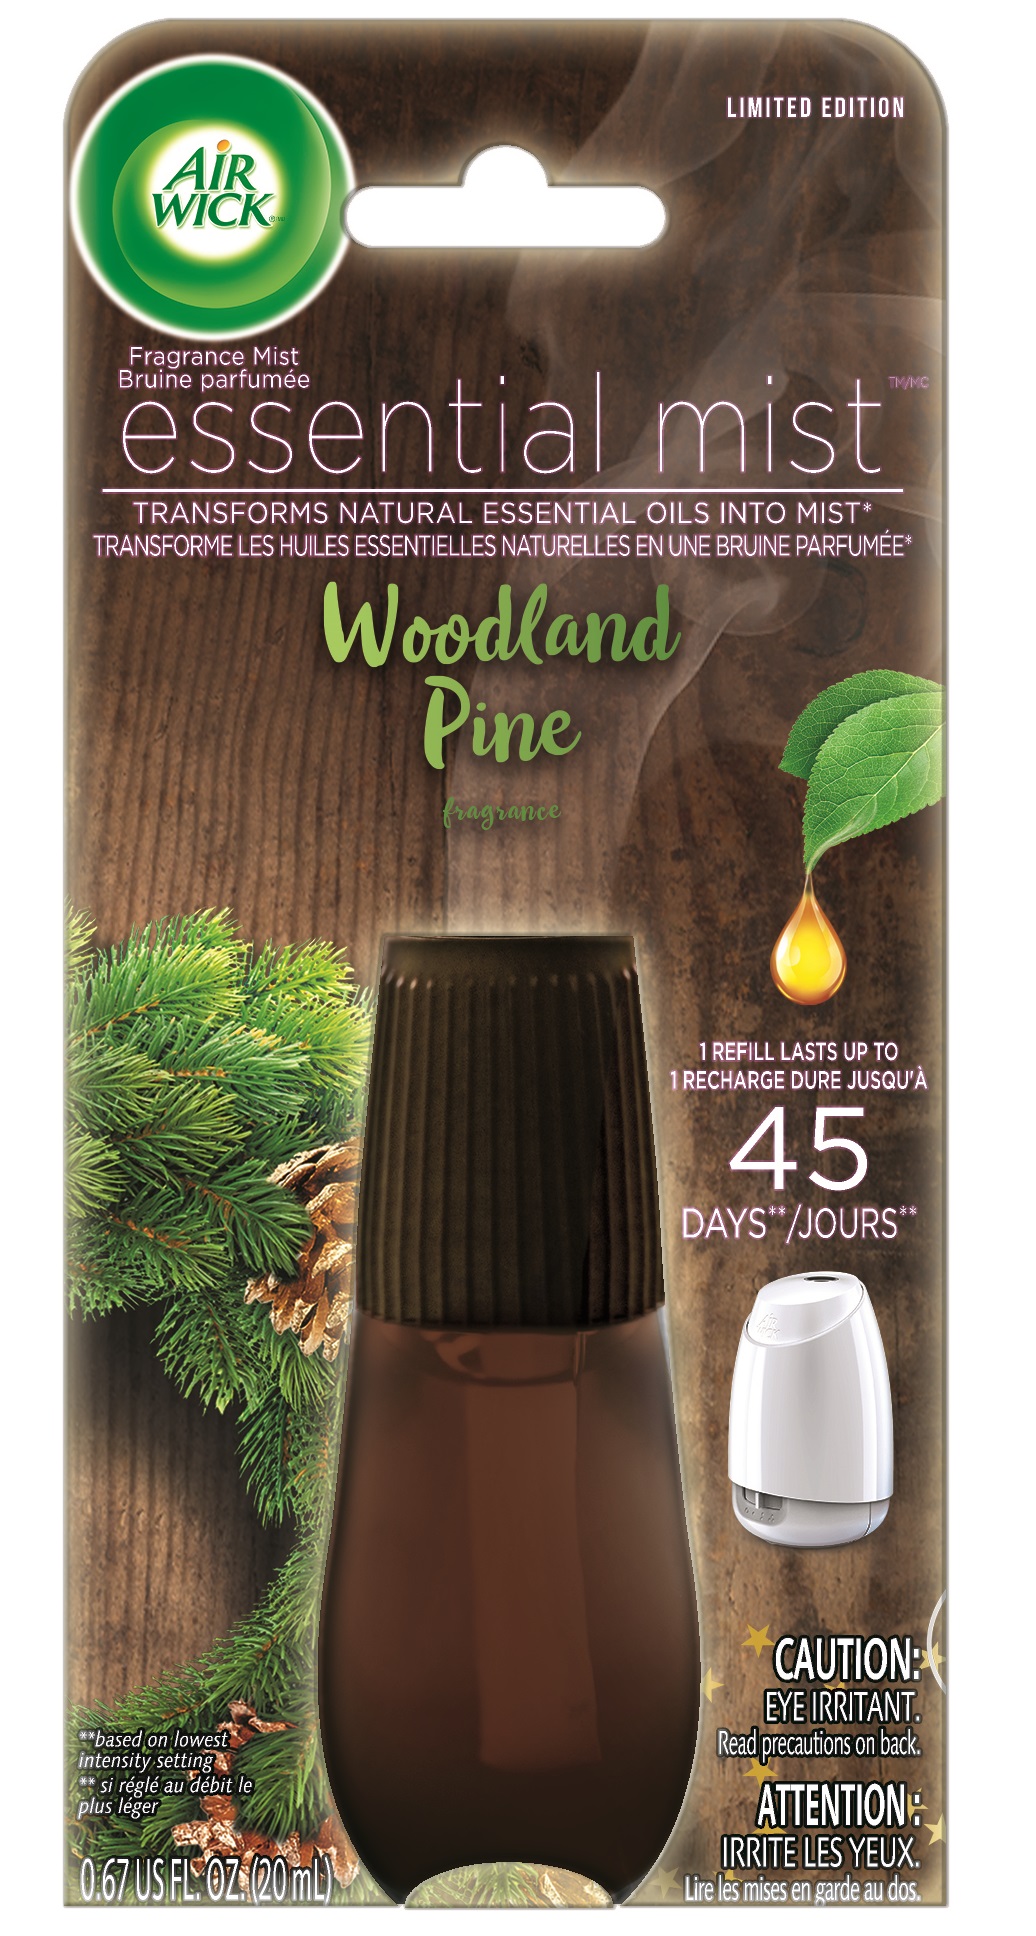 Air Wick Essential Mist Refill, 1ct, Woodland Pine, Fall Scent Essential Oils Diffuser Refill, Air Freshener, Fall Decor - image 1 of 14